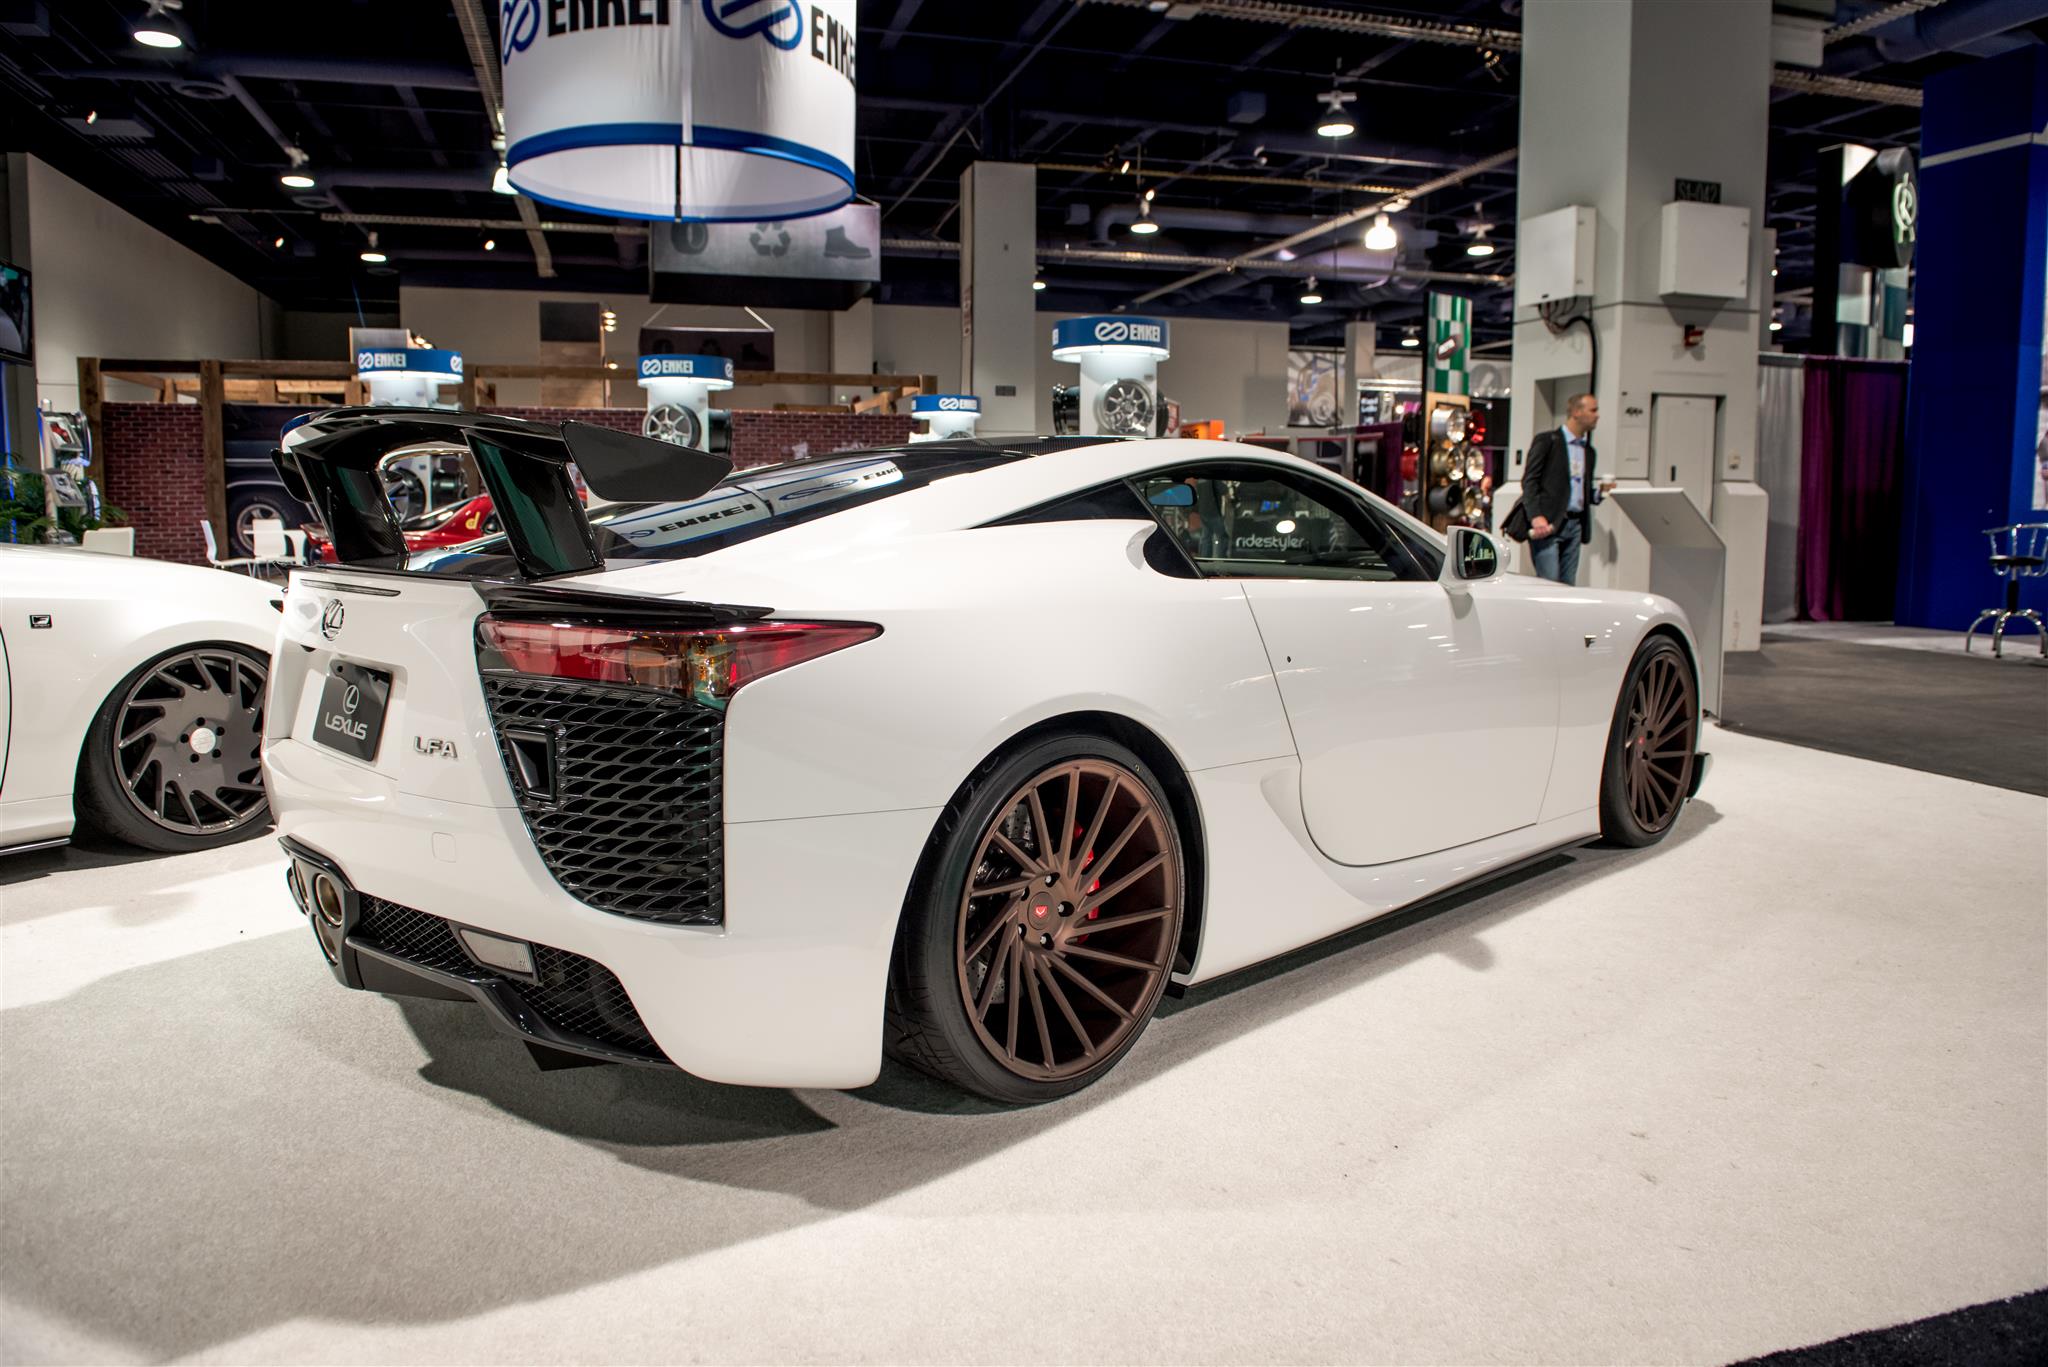 2012 Lexus LFA Nürburgring edition -  Vossen Precision Series "3151" Wheels, Nitto Invo Tires:, The Nurburgring Package:,  fixed carbon fiber rear wing, The Nurburgring Package:,  fixed carbon fiber rear wing